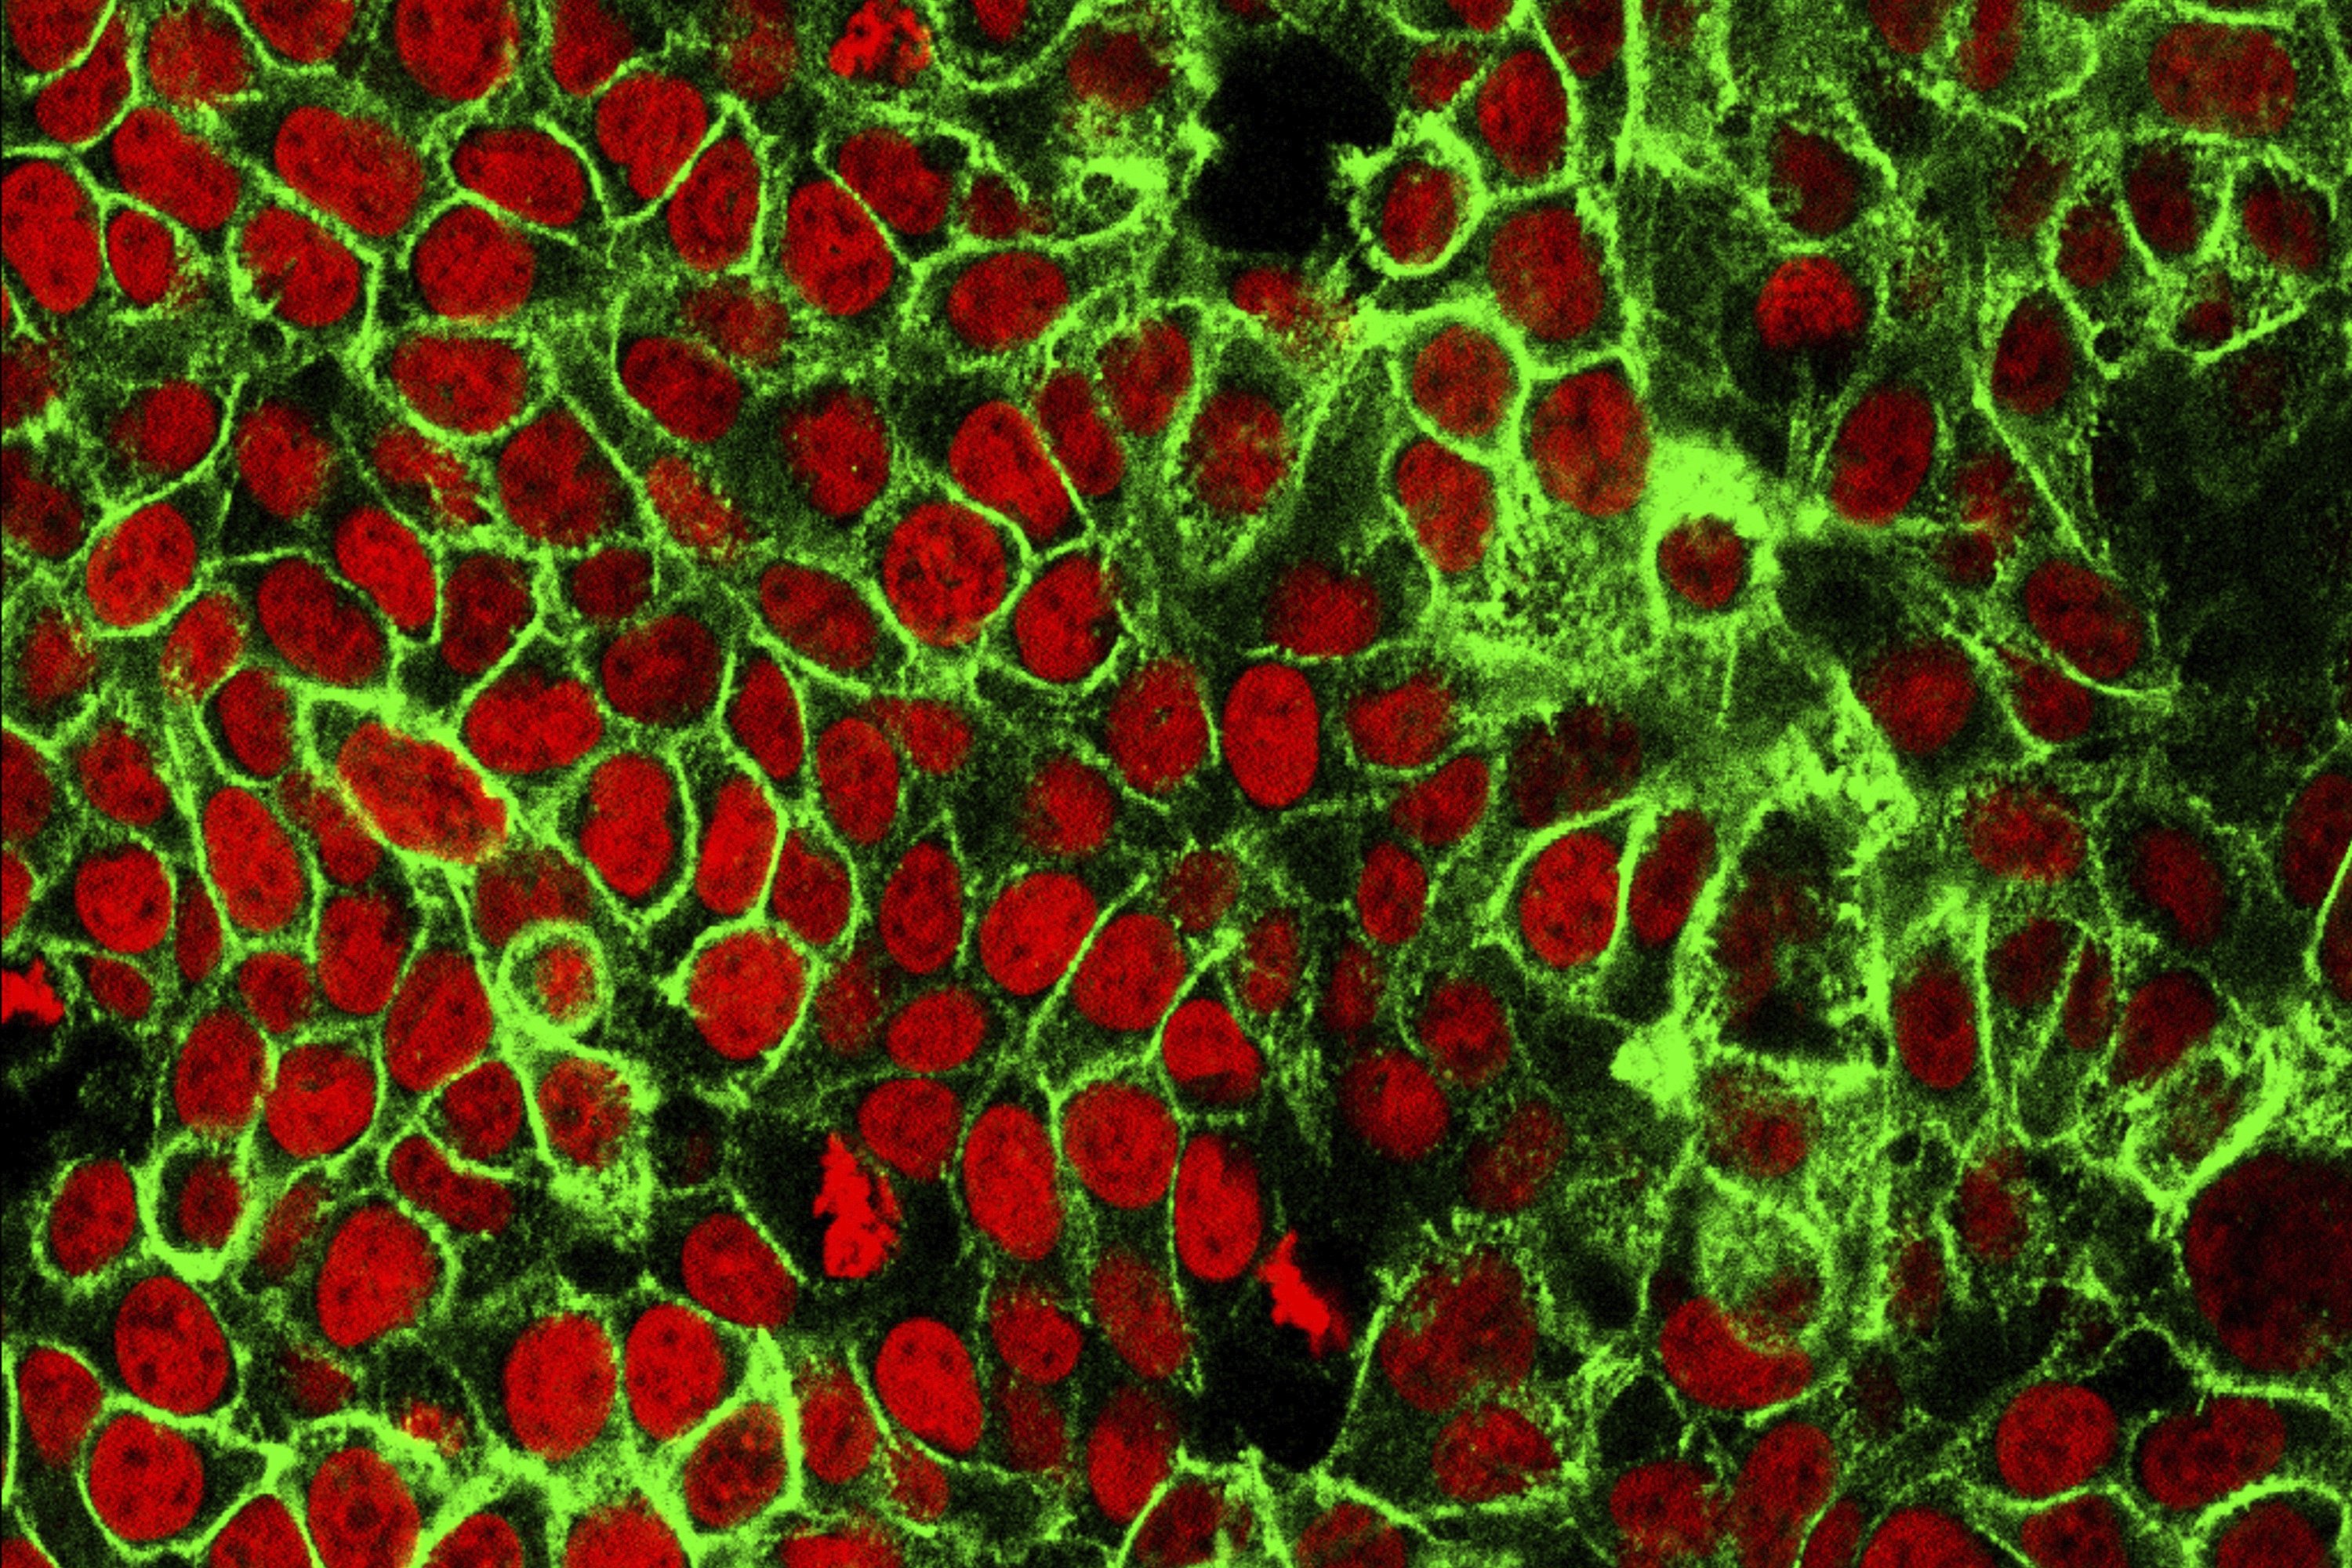 This microscope image made available by the National Cancer Institute Center for Cancer Research in 2015 shows human colon cancer cells with nuclei stained red. (NCI Center for Cancer Research via AP)